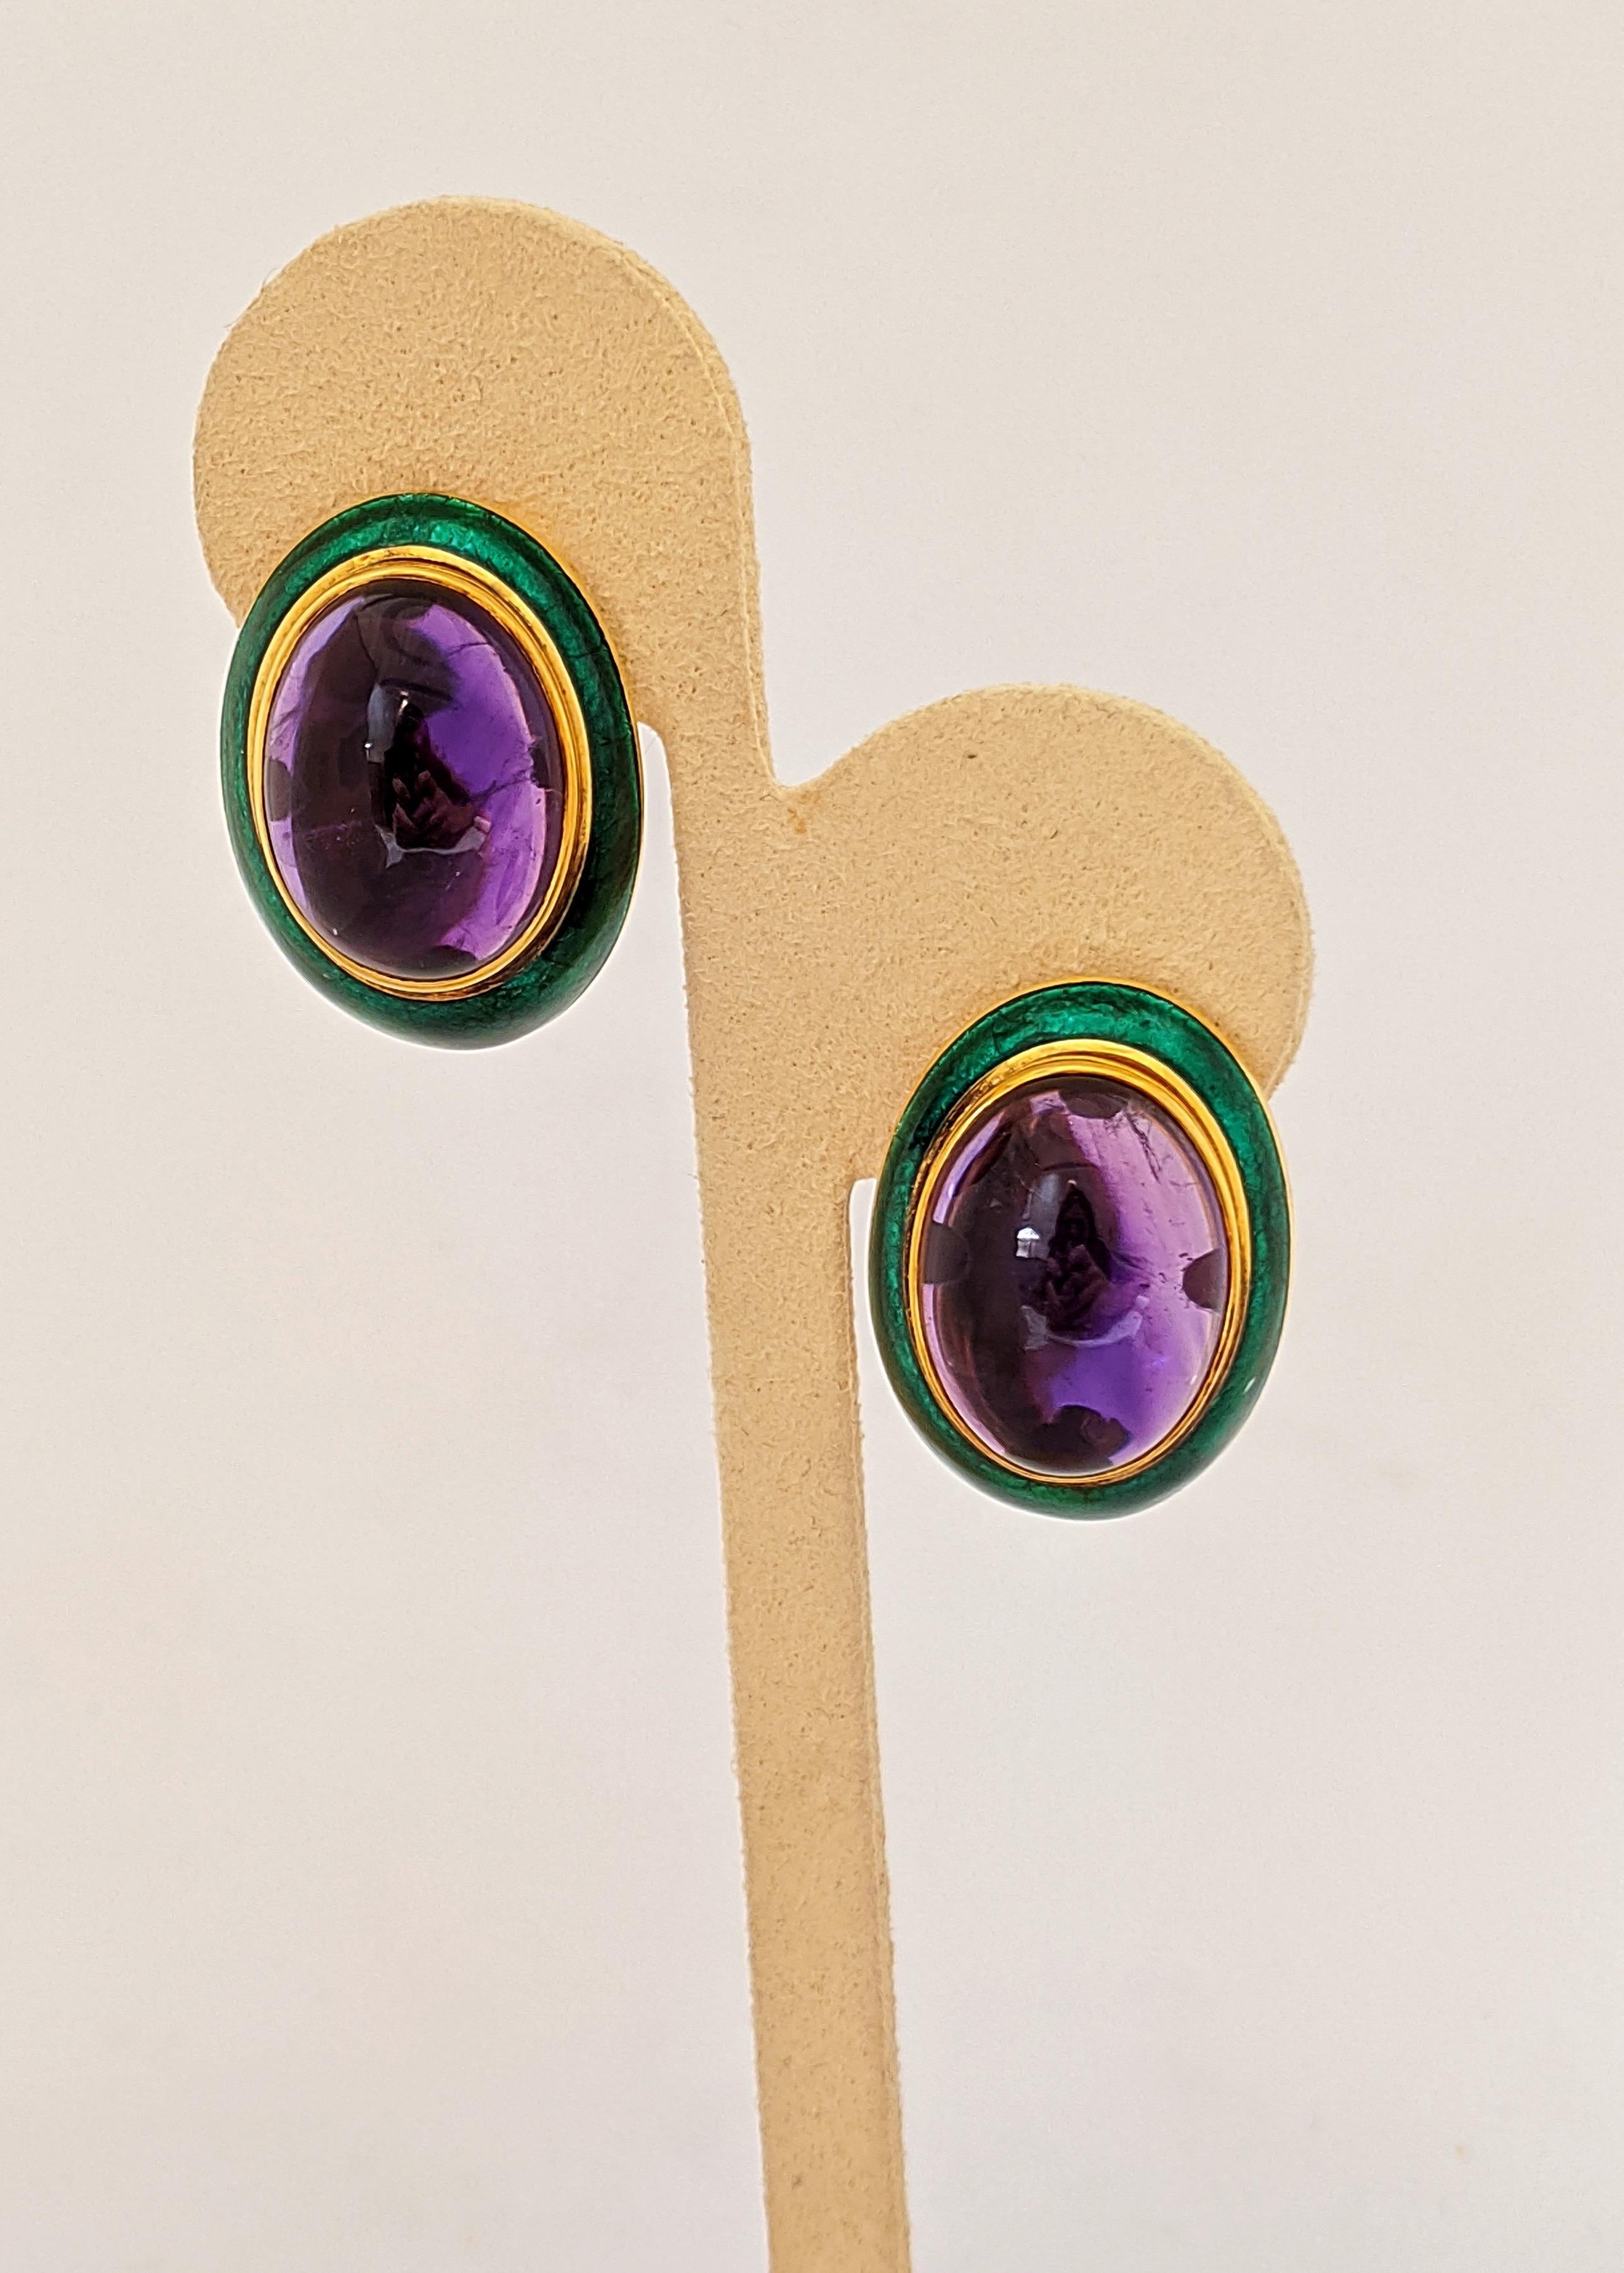 A striking combination of colors. These 18 karat yellow gold earrings feature large oval cabochon Amethyst centers. The center stones are set in a gold bezel surrounded by a vibrant green enamel setting. The earrings measure 1 1/8